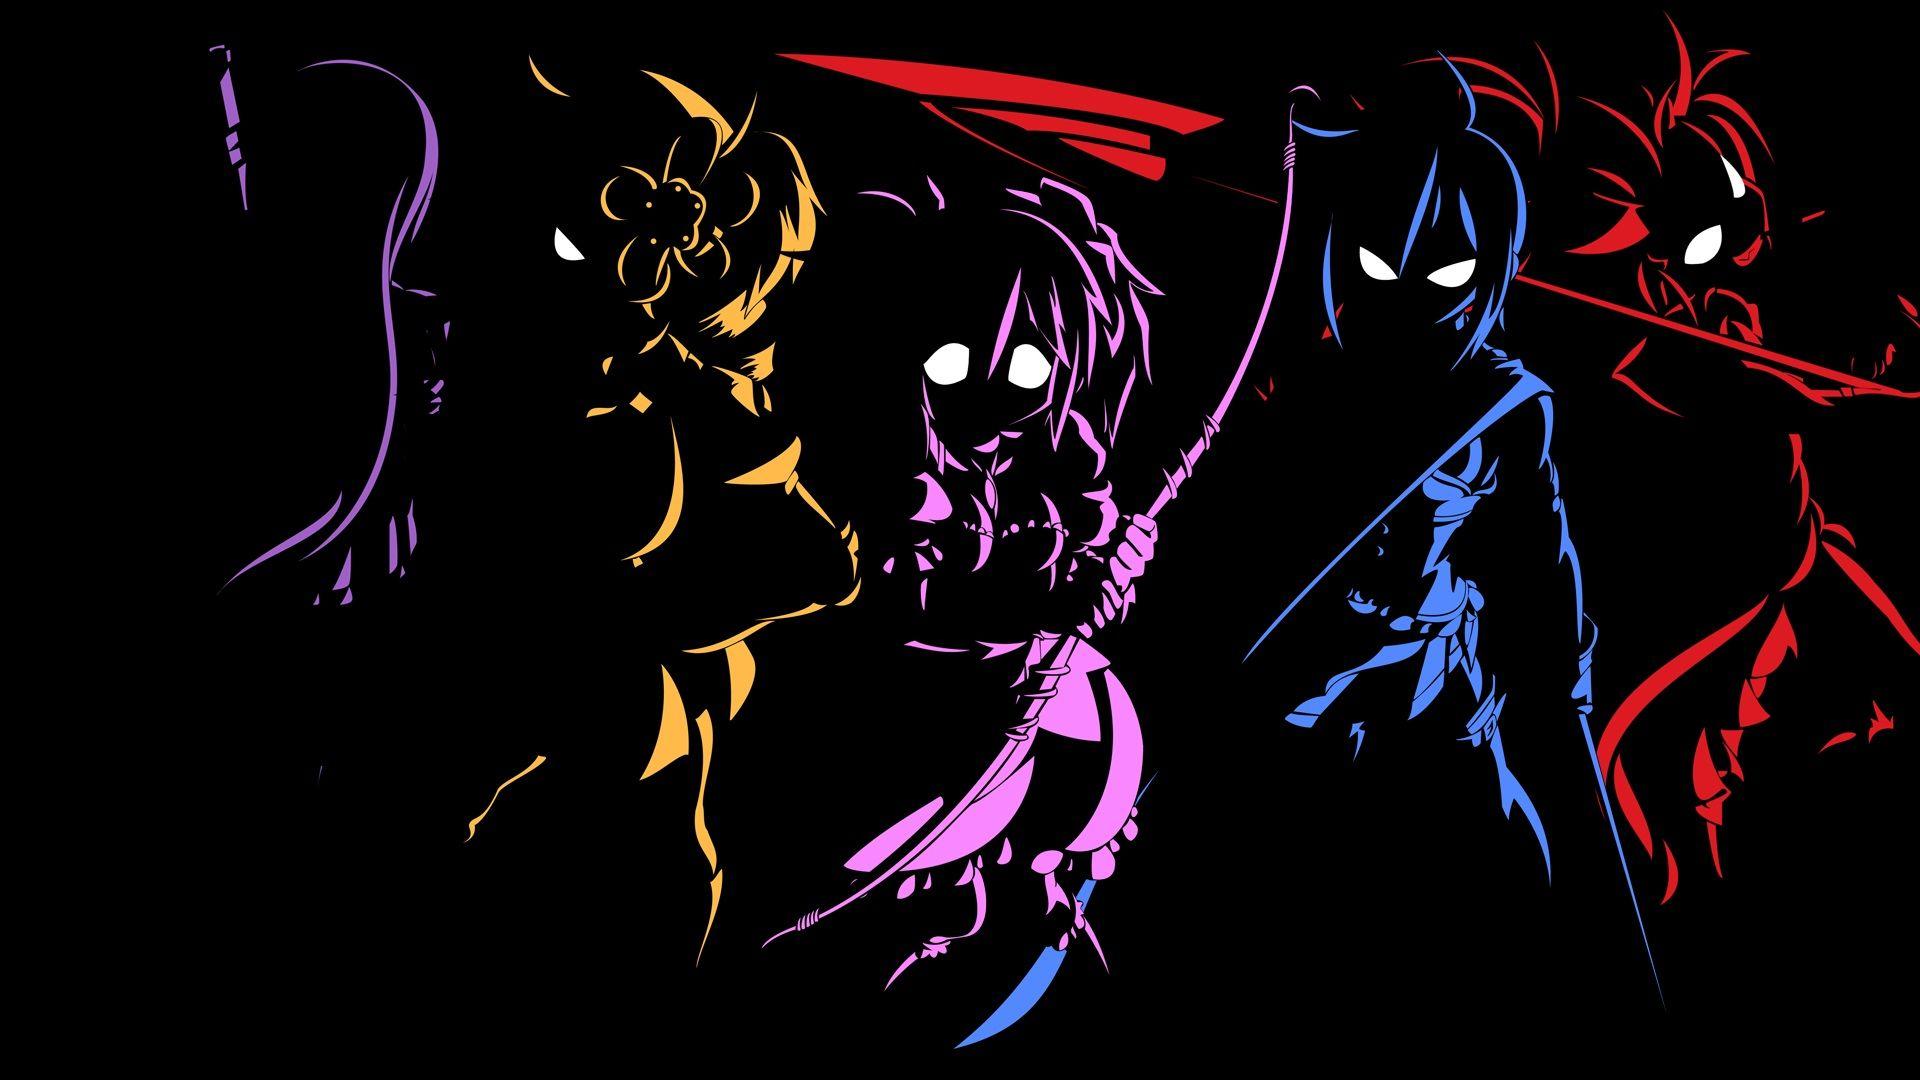 Download Anime Characters Outline Black Wallpaper 1920x1080. Full